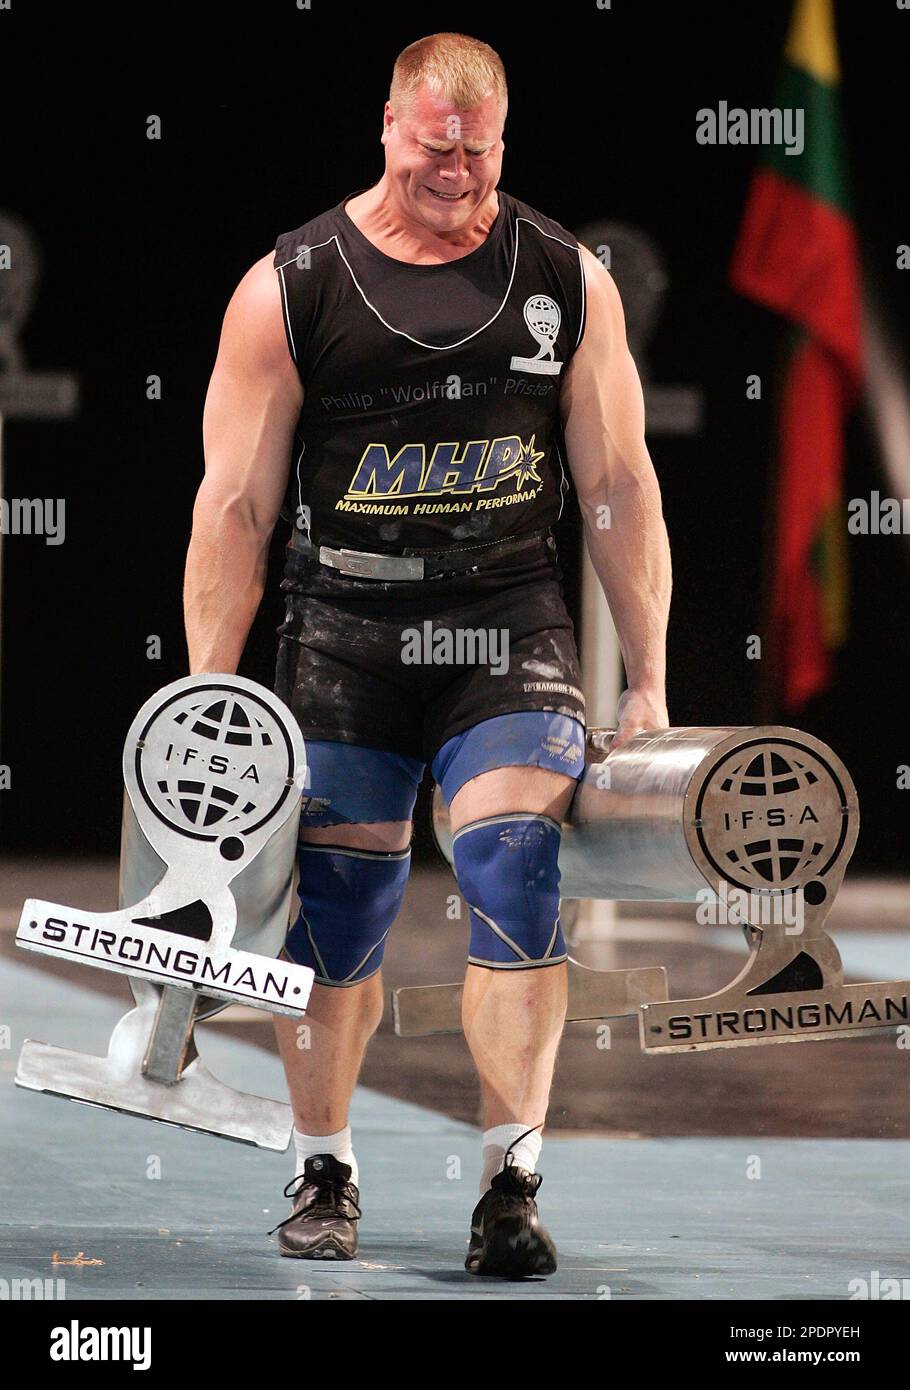 United States' Phil Pfister carries the 320kg weights to place second in  the Farmer's walk event at the IFSA Strongman World Championships Sunday  Sept. 25, 2005, in Quebec City. (AP Photo/Jacques Boissinot